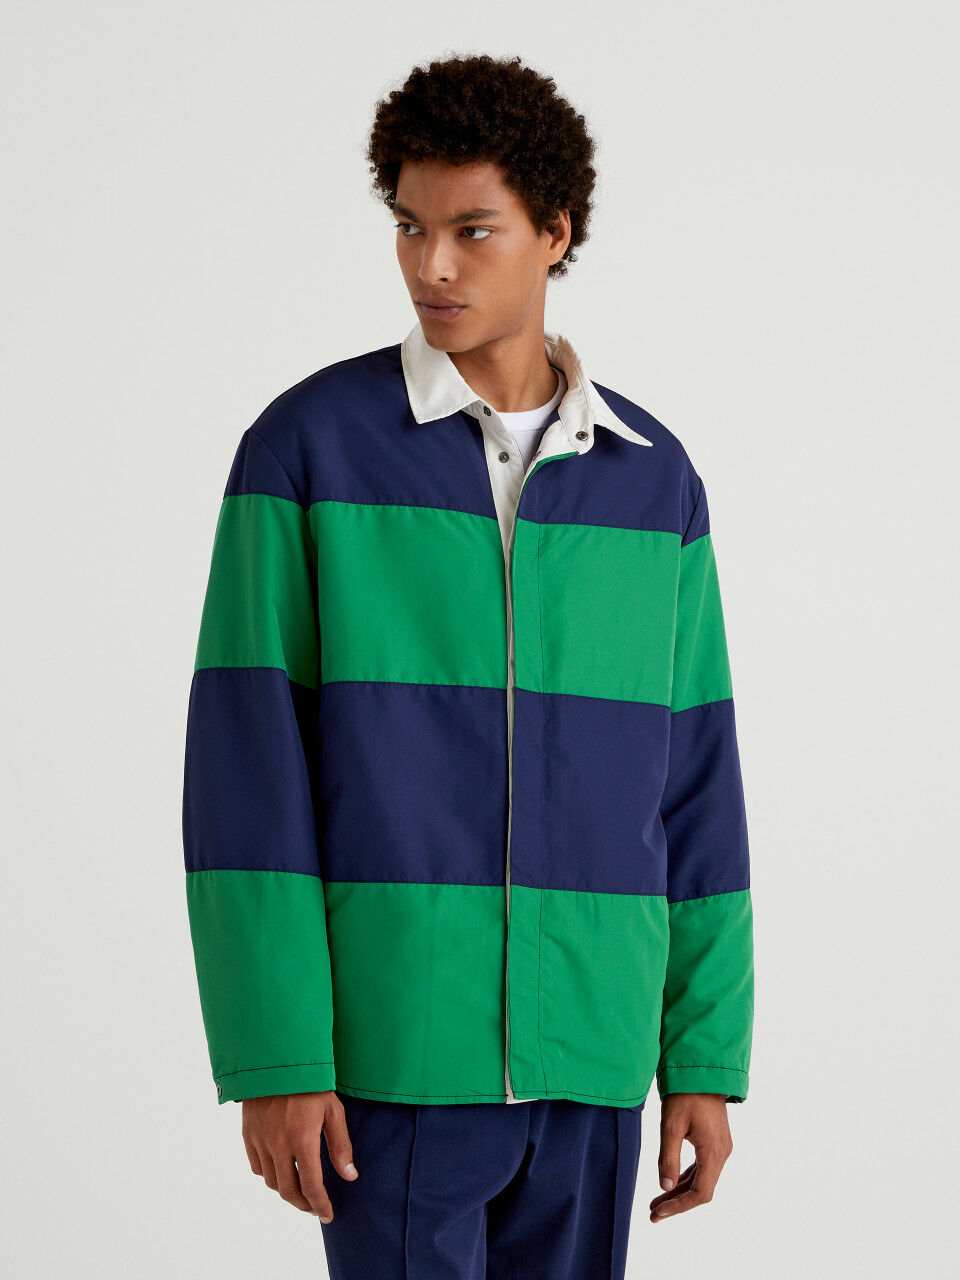 basin Submerged sheep Men's Light Jackets New Collection 2023 | Benetton